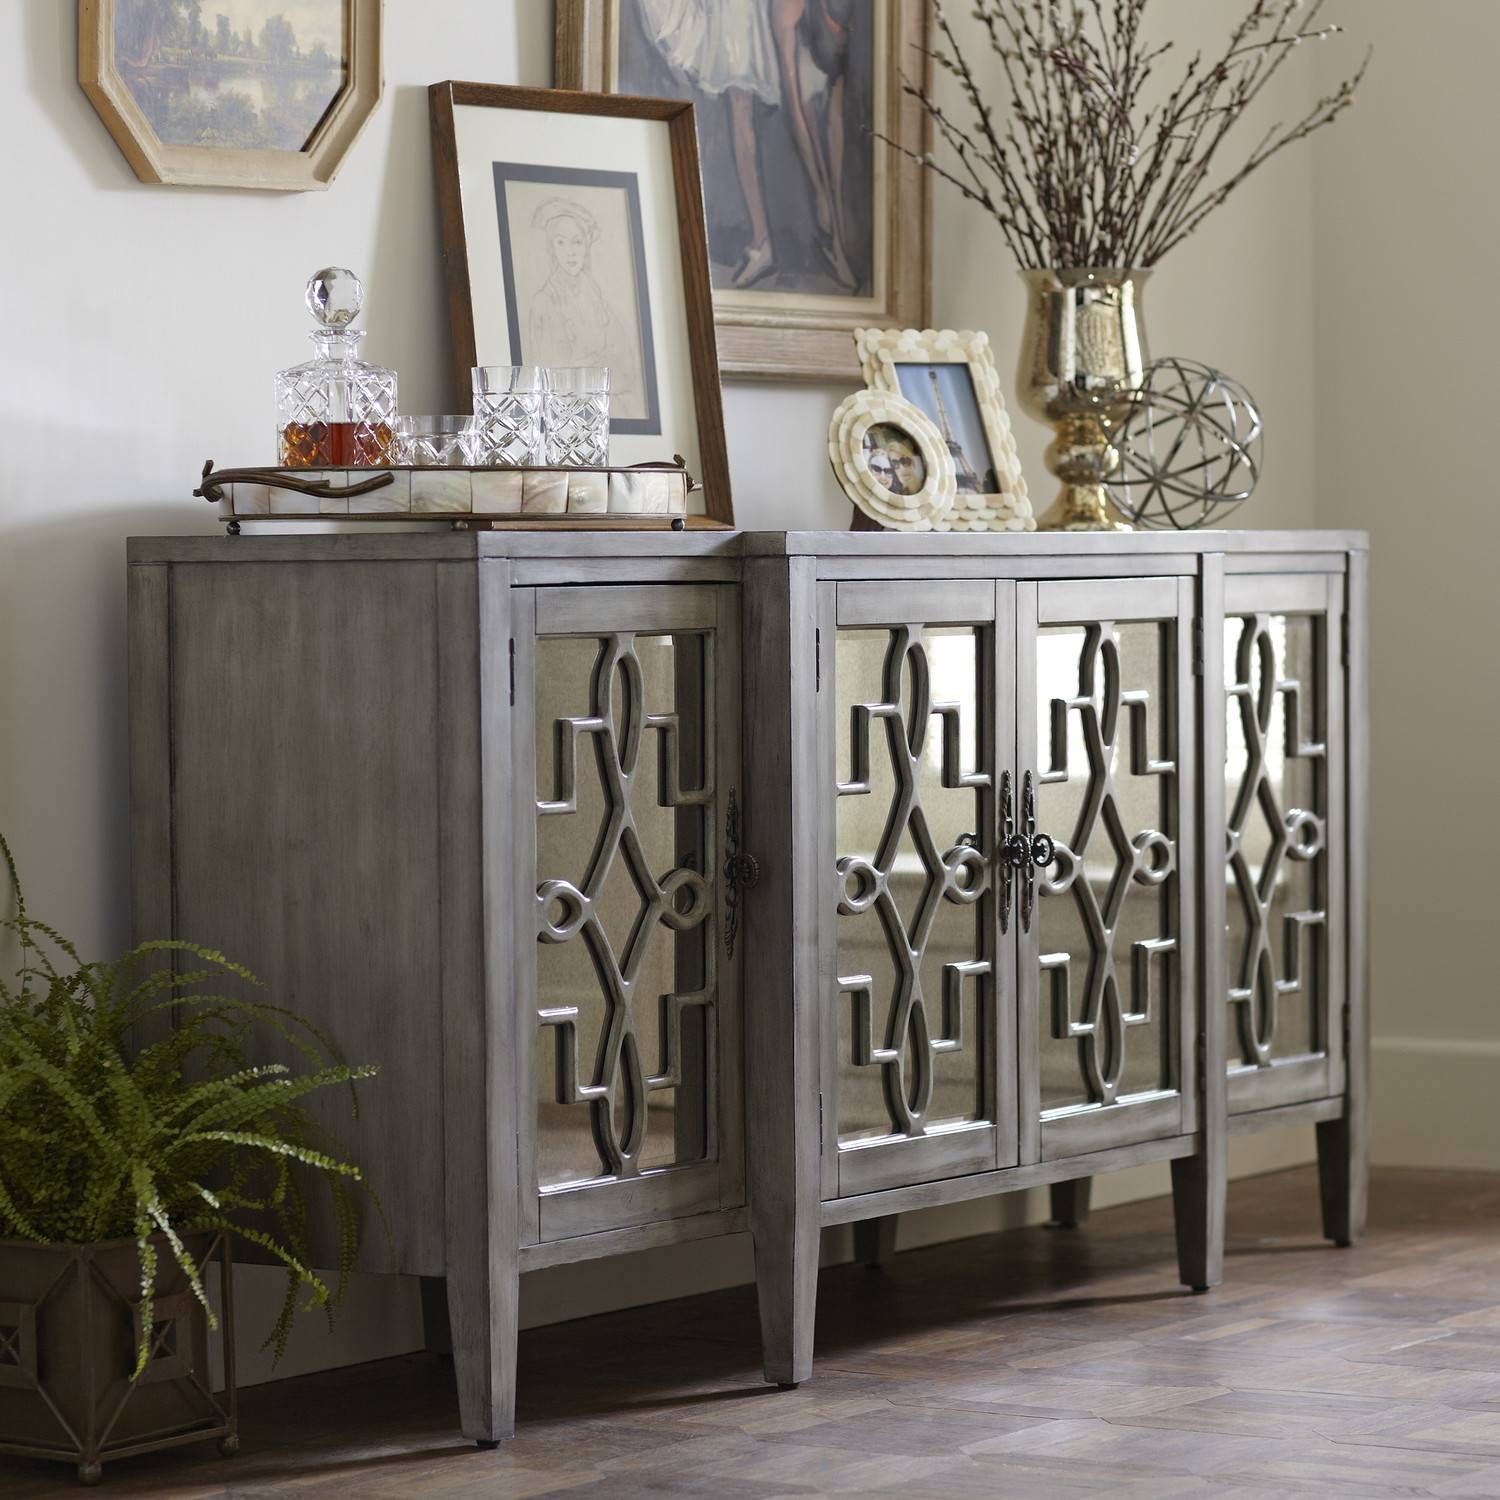 Shopping For A Narrow Sideboards And Buffets With Regard To Narrow Sideboards And Buffets (View 9 of 15)